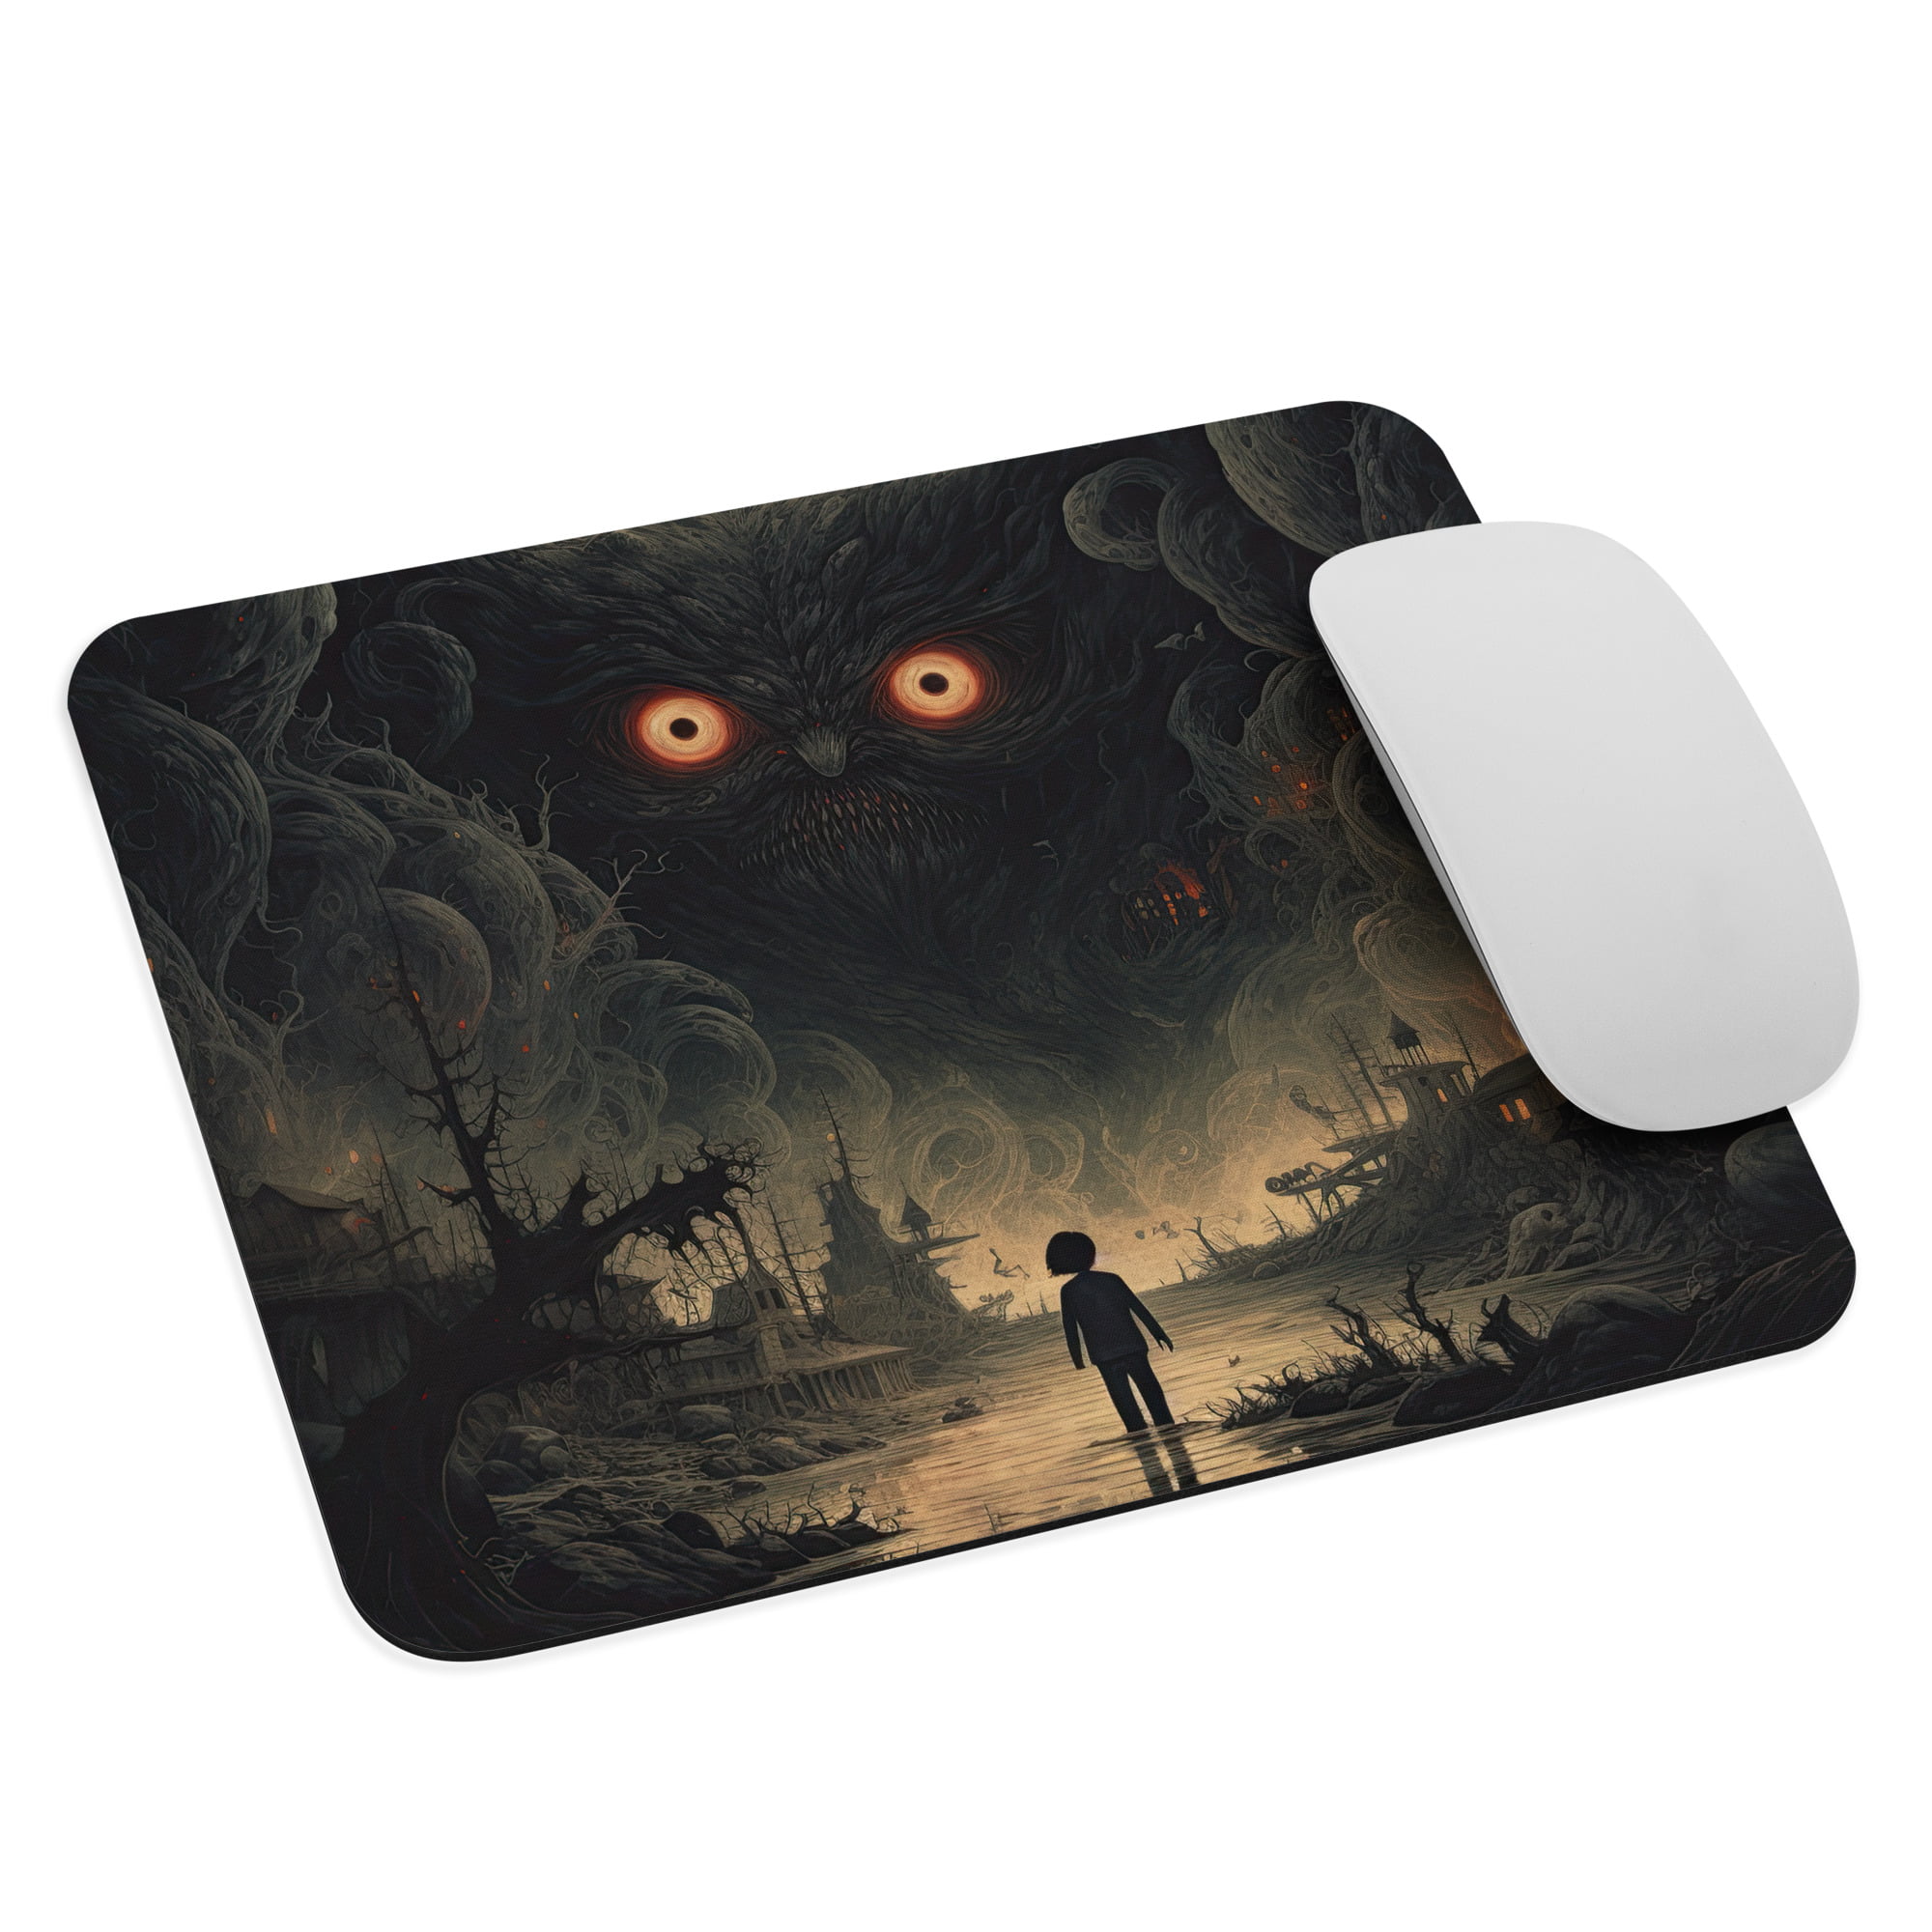 The Watcher Monster Art Mouse pad